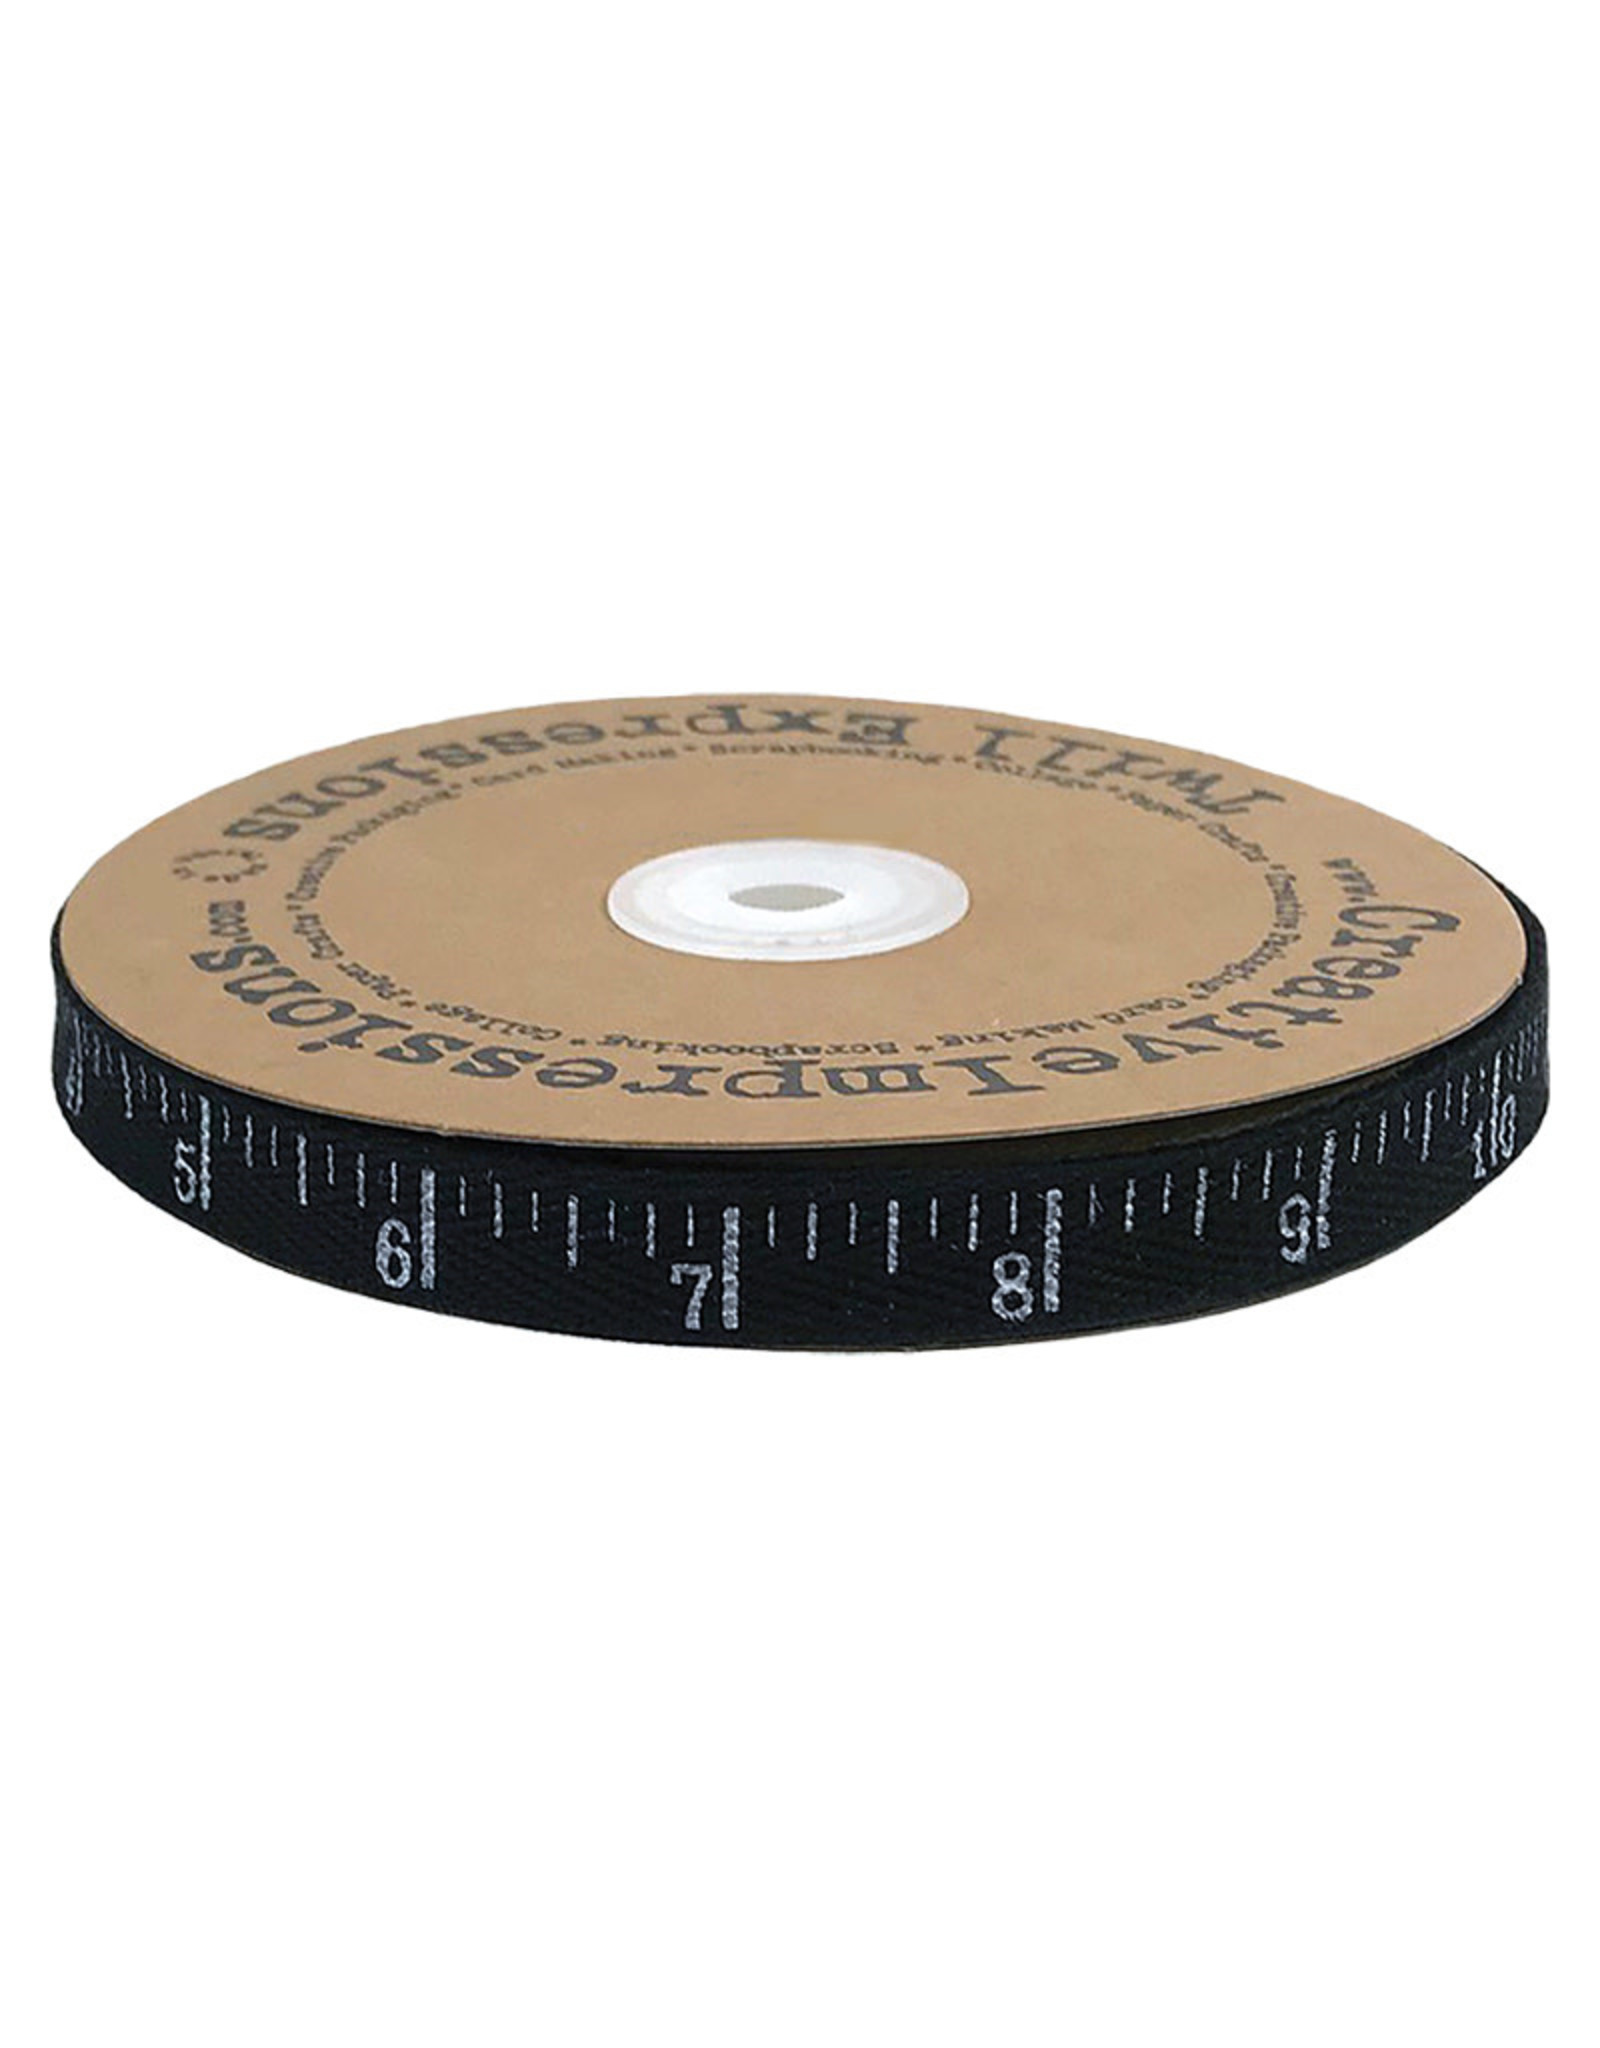 Creative Impressions Antique Ruler Twill Tape, Black, by the Yard, 1/2 inch wide